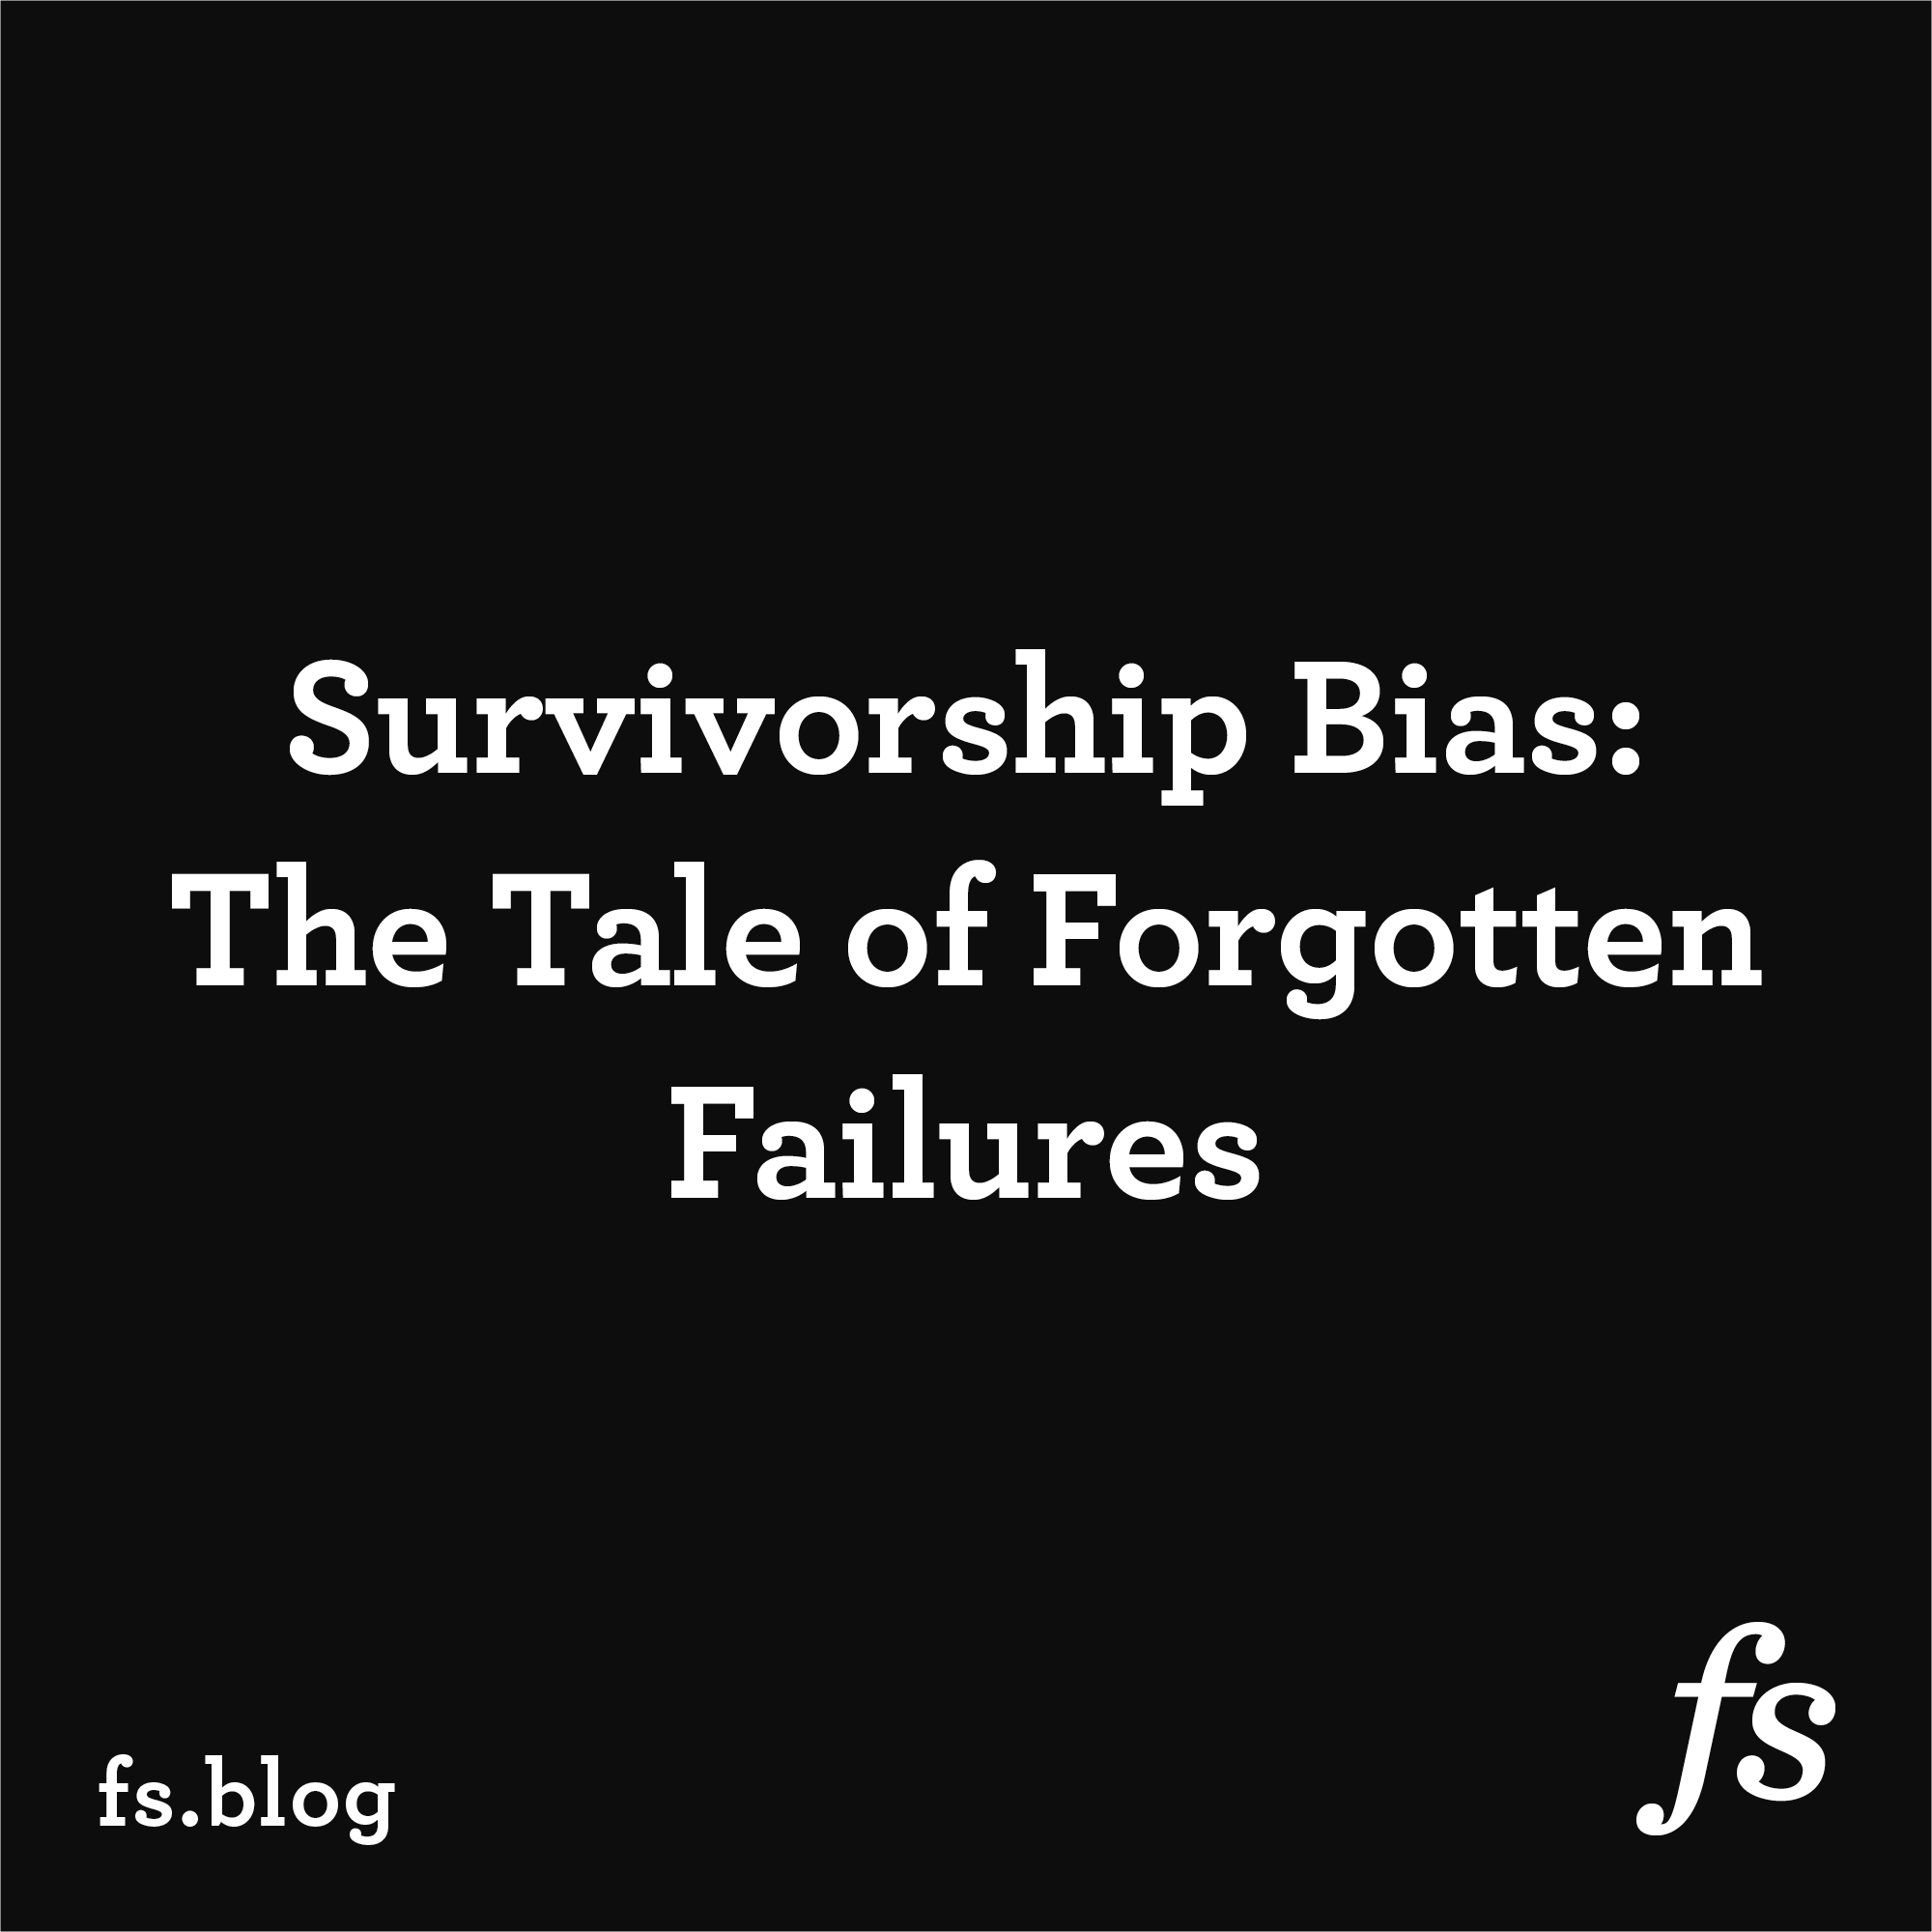 Survivorship Bias: The Exception is not the Rule